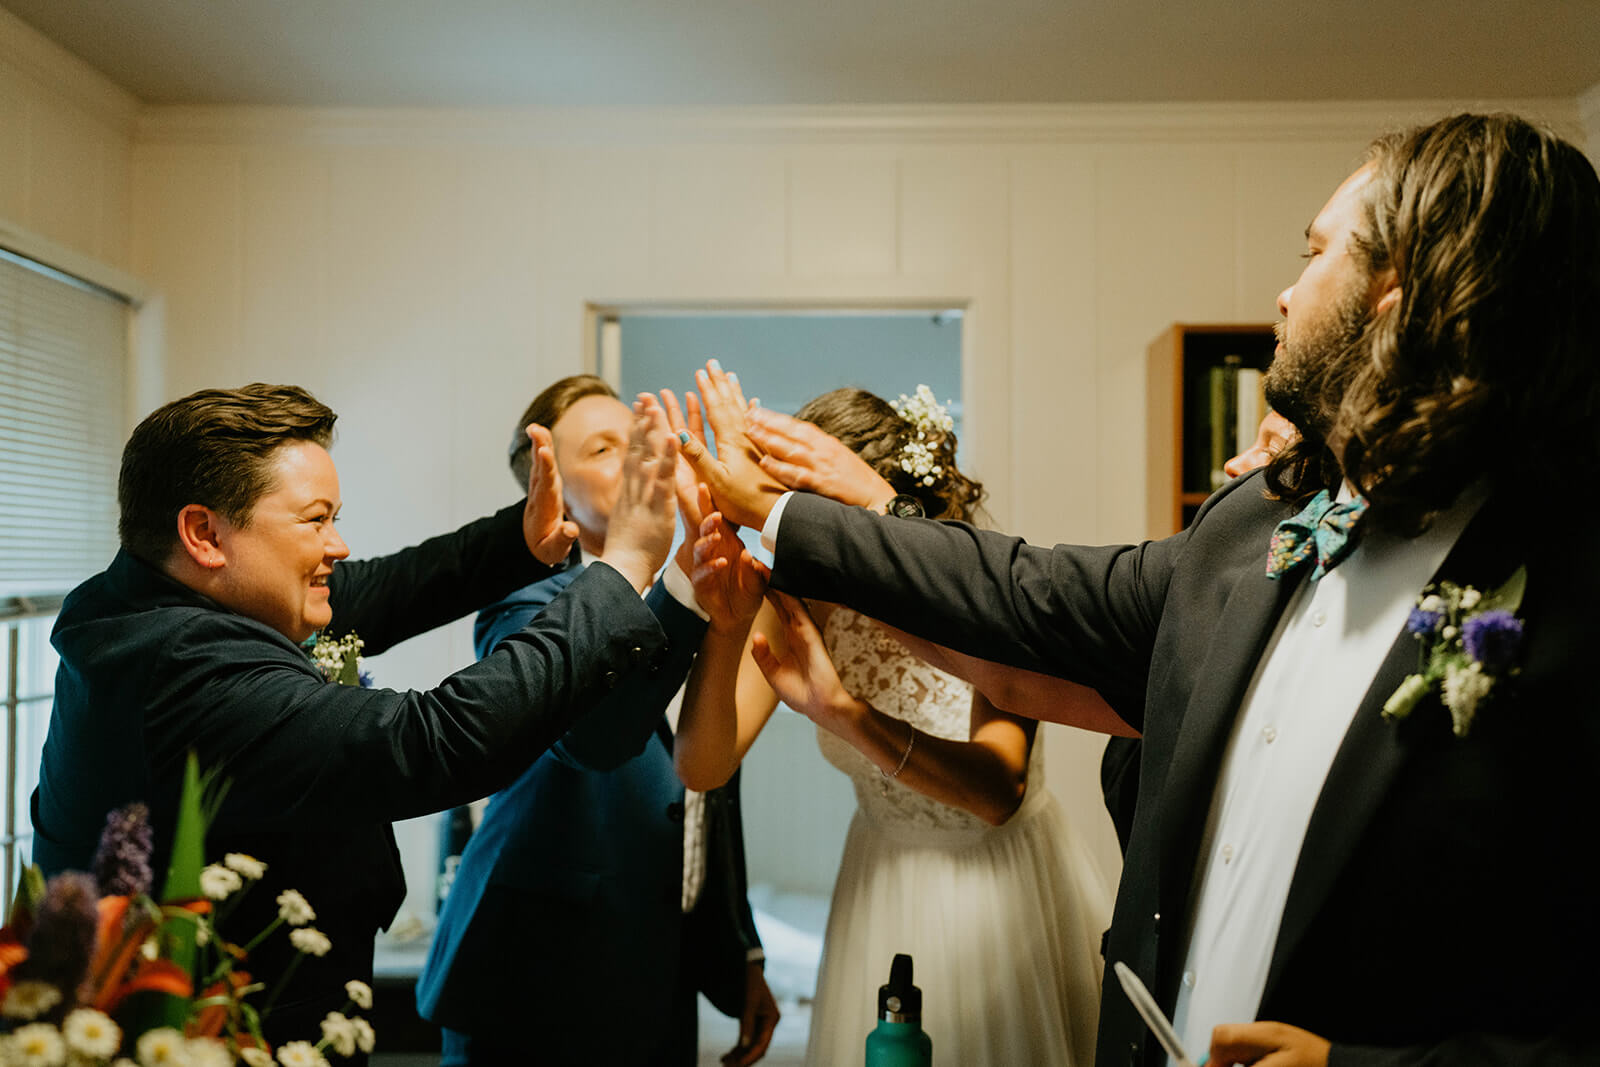 Two brides cheering with friends after wedding ceremony